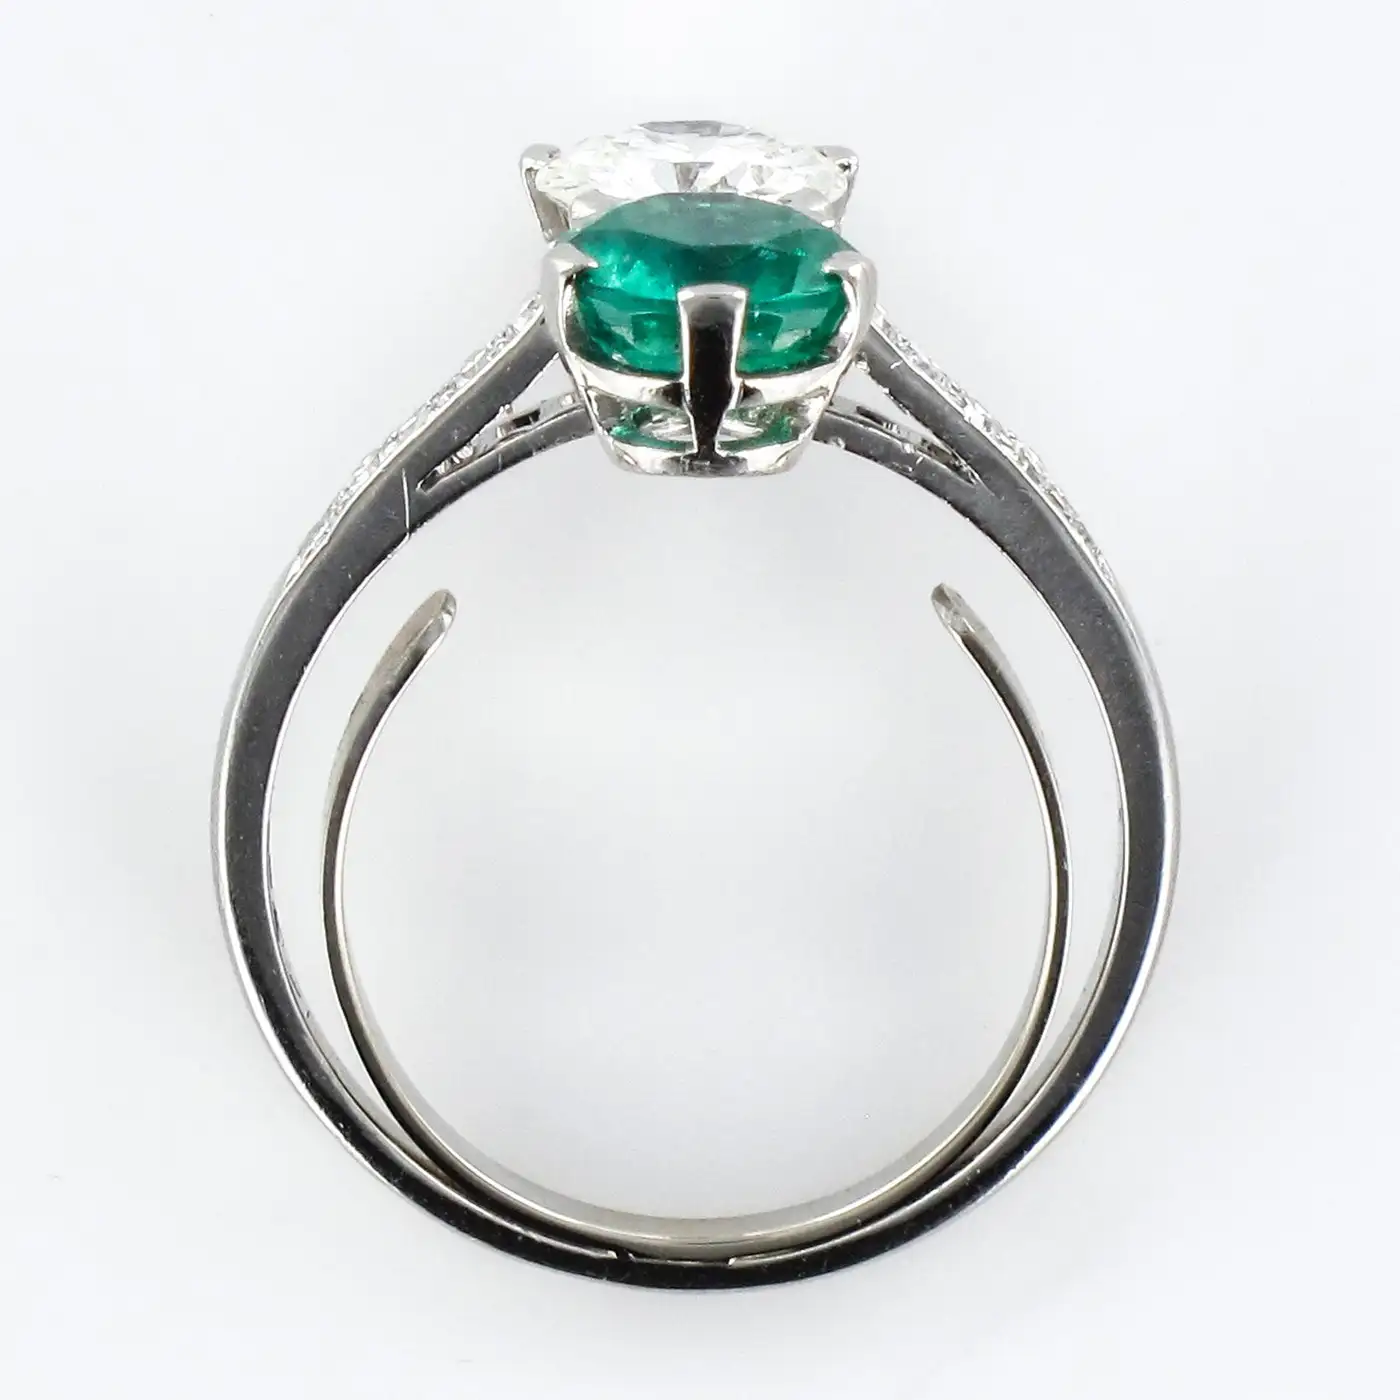 1930s-French-Platinum-Art-Deco-Emerald-Diamond-You-and-Me-Ring-8.webp